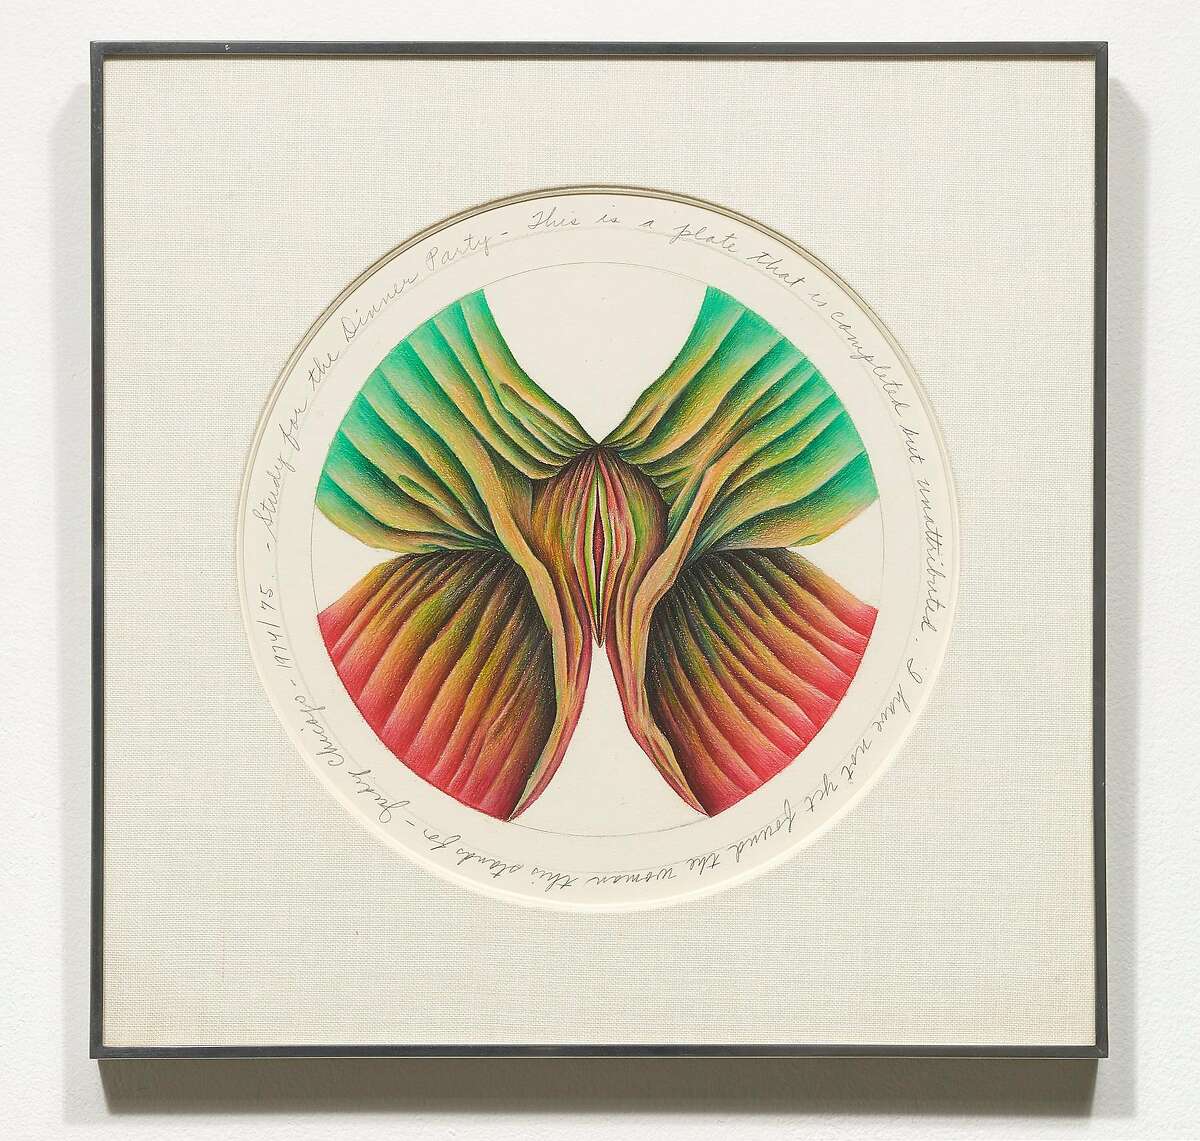 Judy Chicago, "Study for Untitled Test Plate" (1974-75)